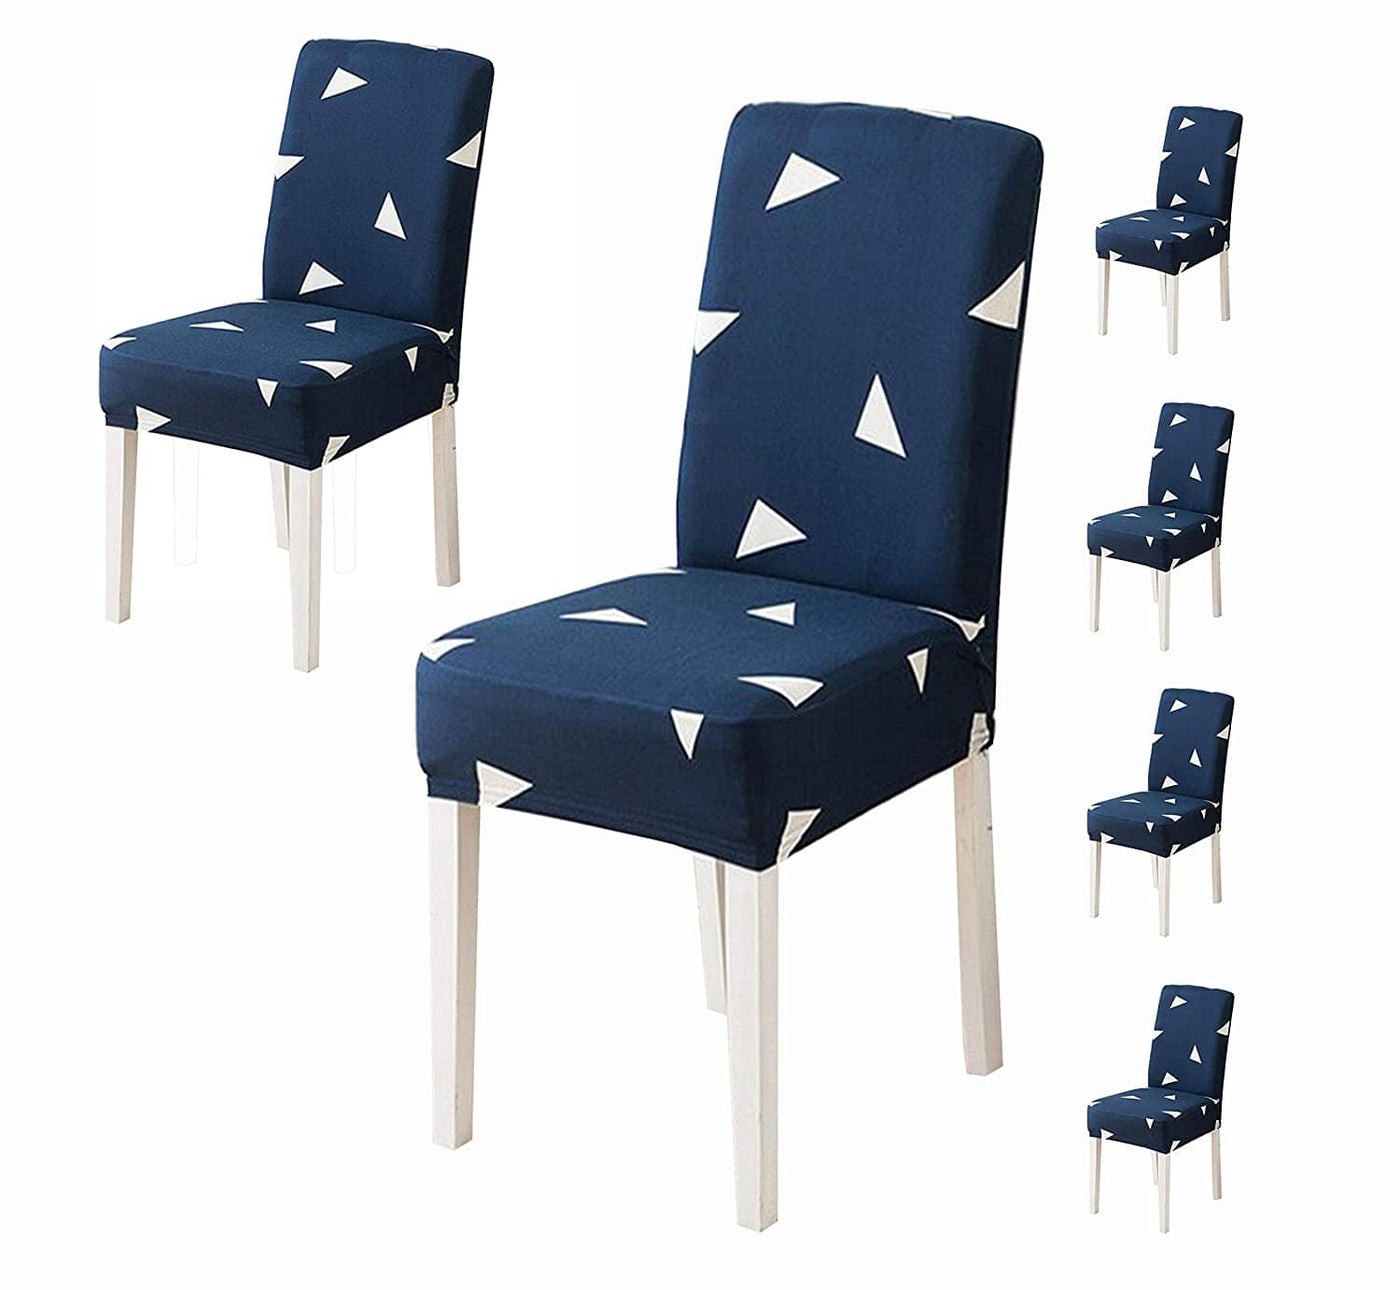 Dark Blue Triangle Premium Chair Cover - Stretchable & Elastic Fitted Great Happy IN 6 PCS - ₹1699 